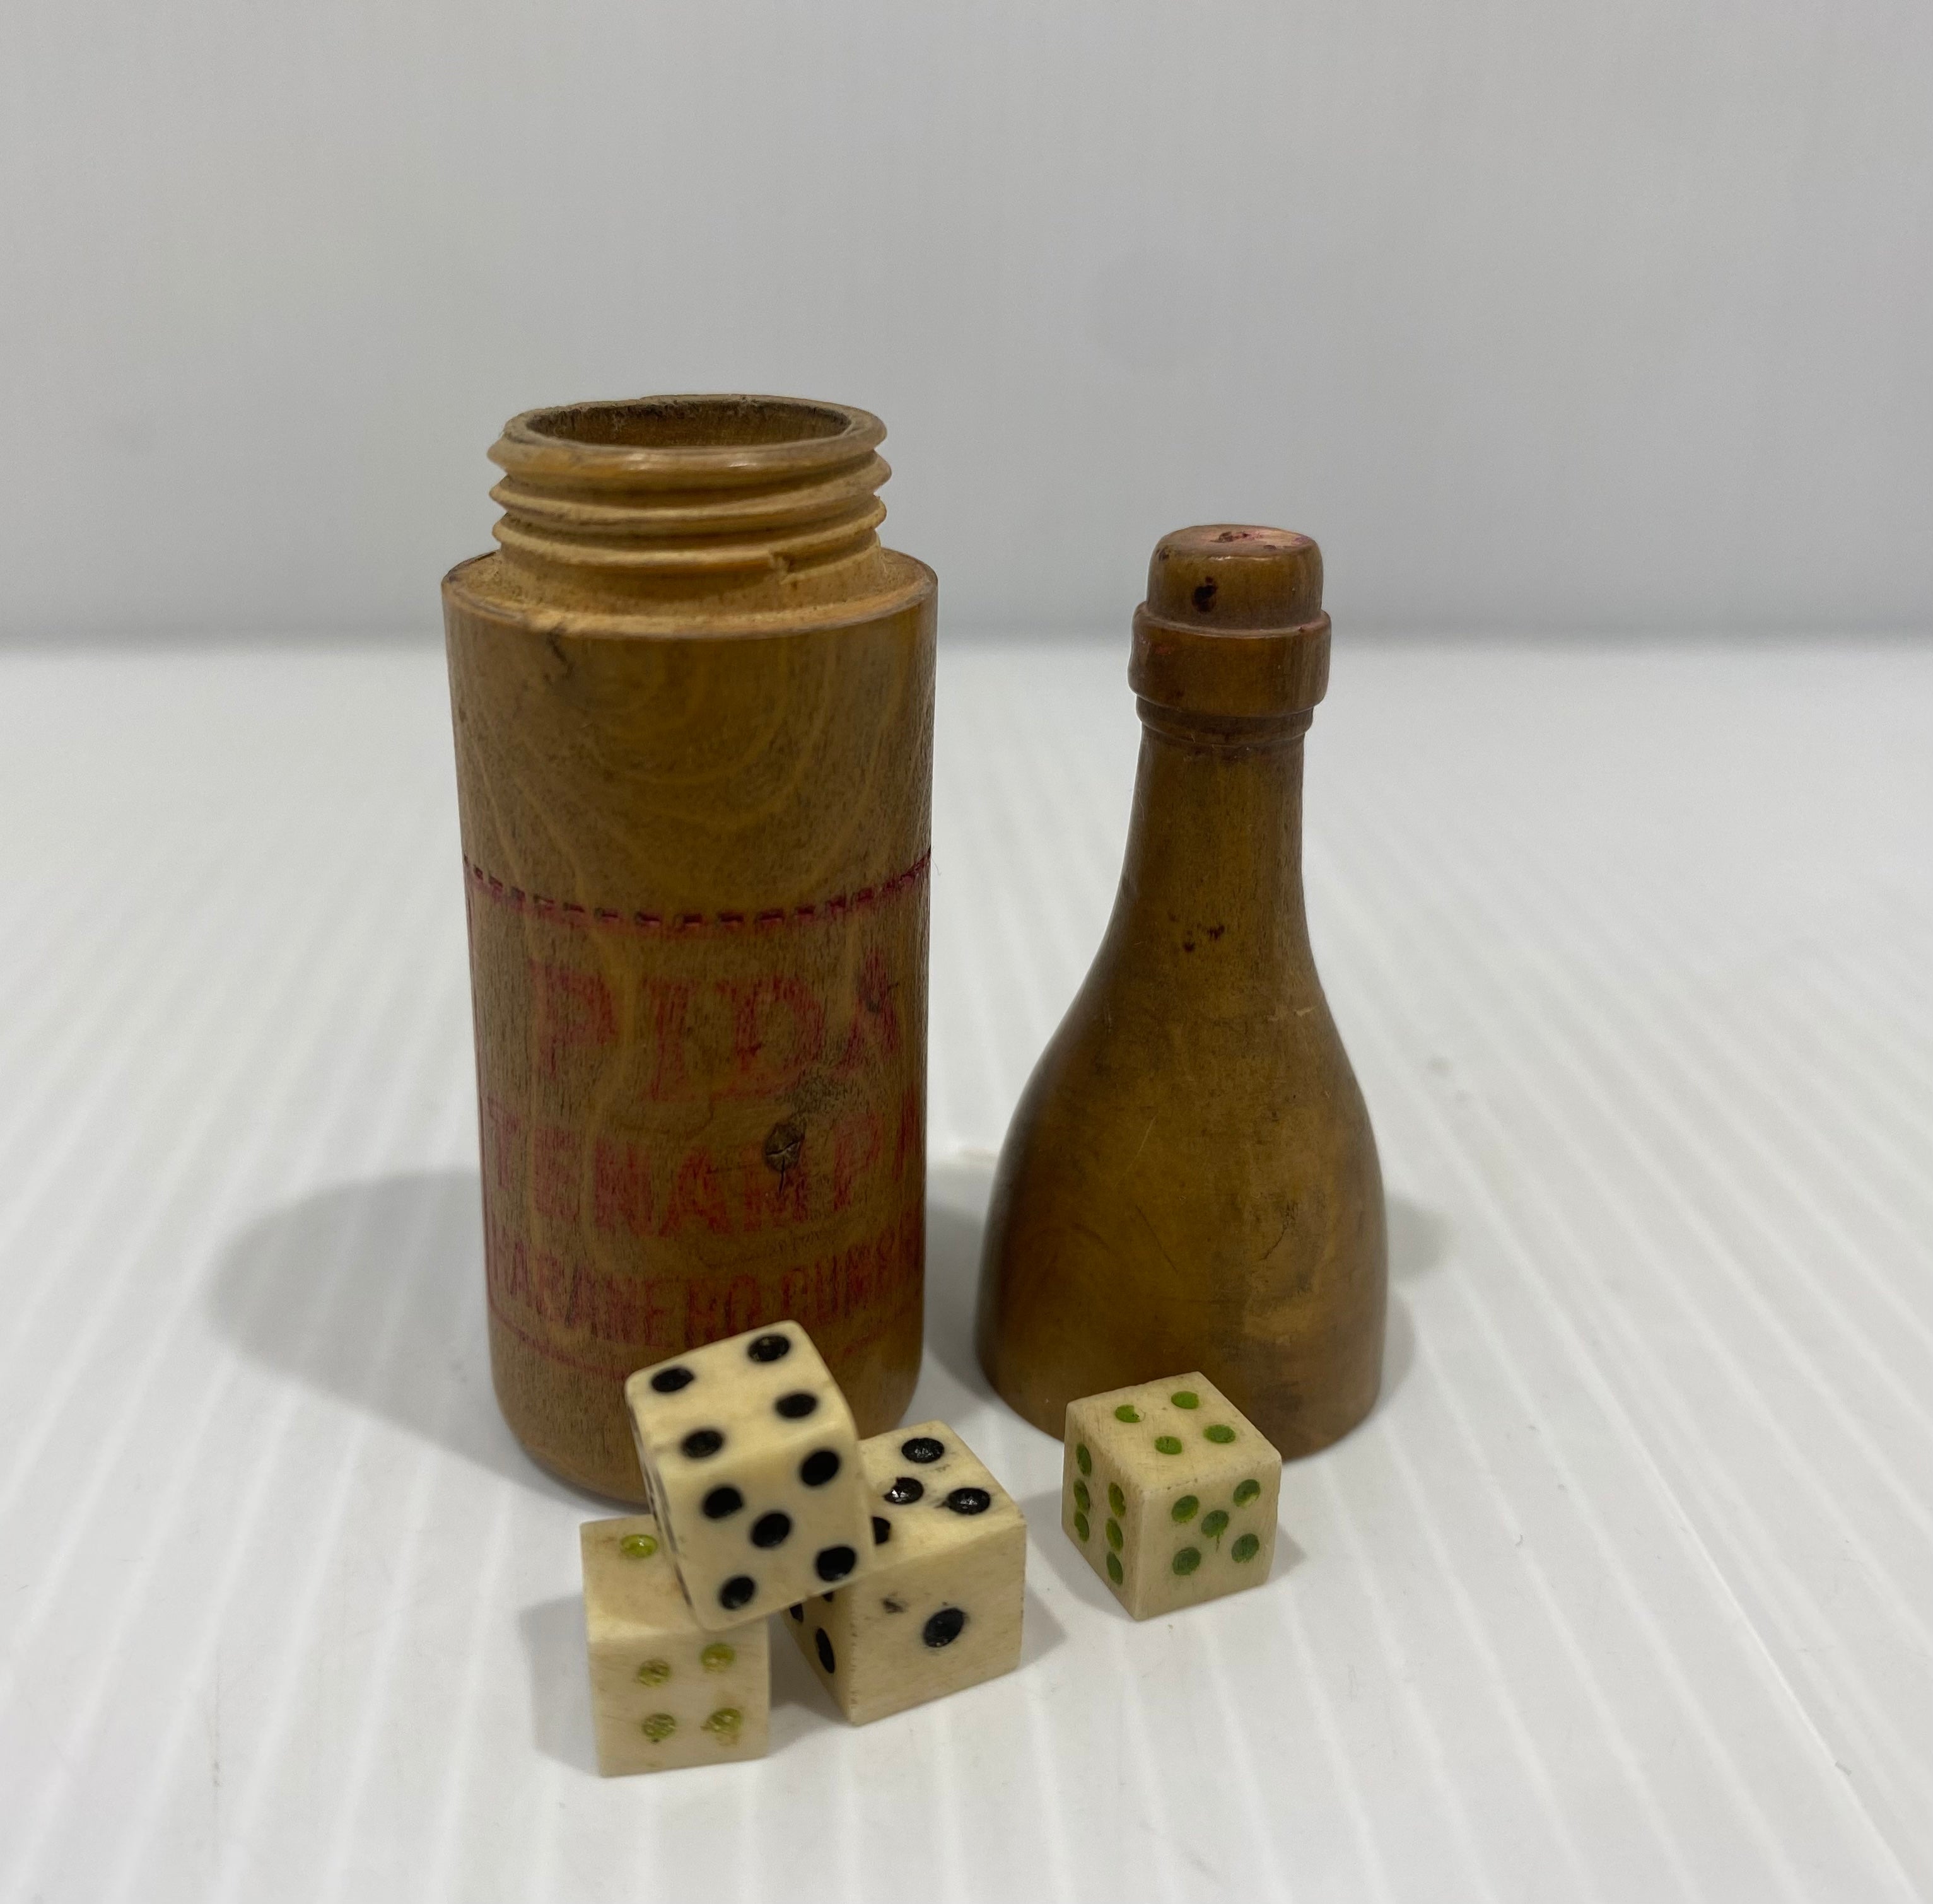 Miniature Wooden Bottle Shaped Box Containing four Small Bone Dice.